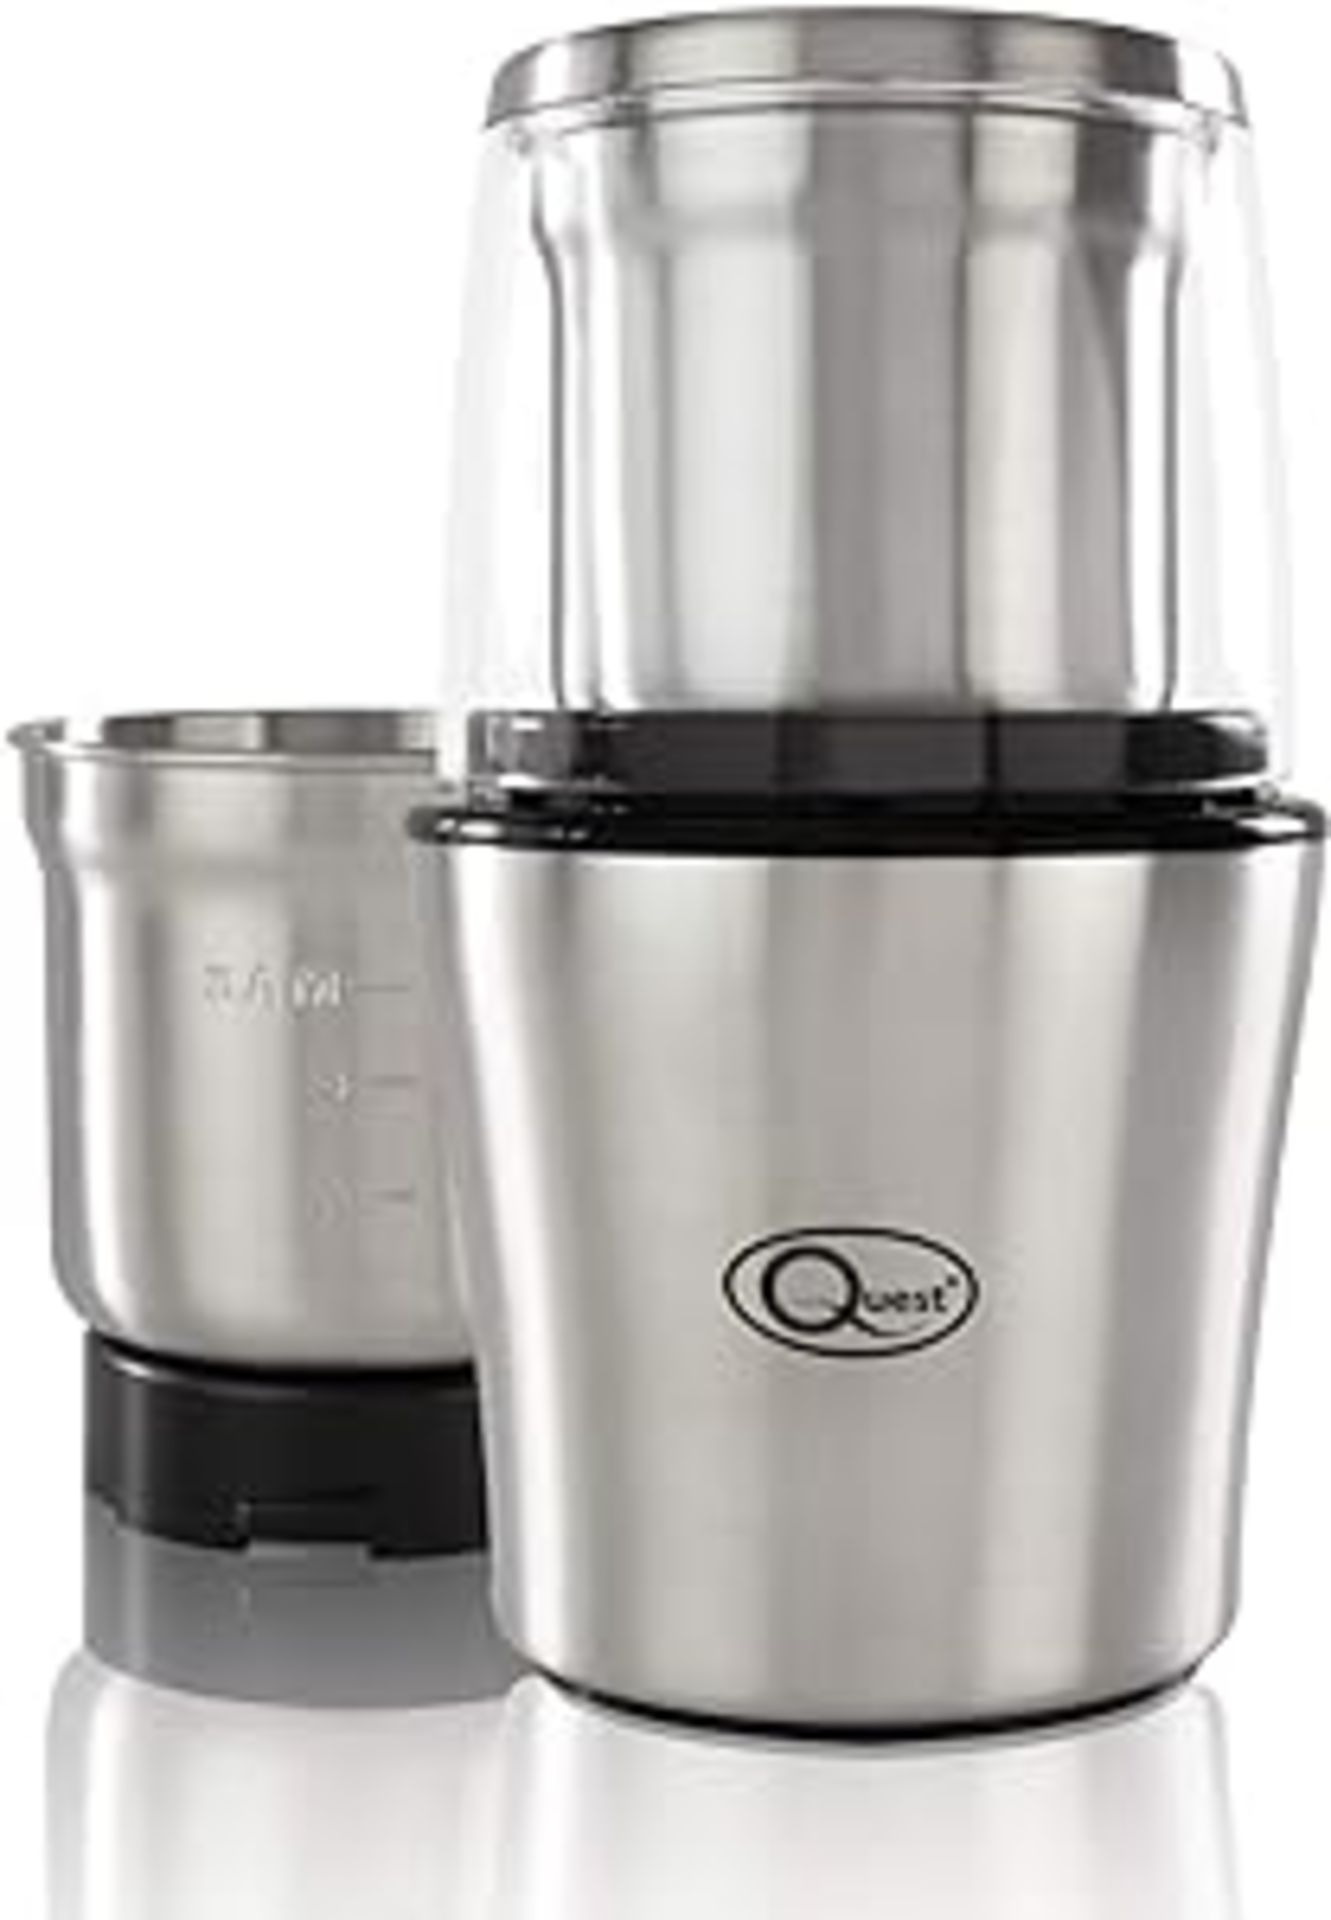 3 x Quest 34170 Electric Wet and Dry Grinder / One Touch Operation / Coffee, Spices, Nuts, Fruit,